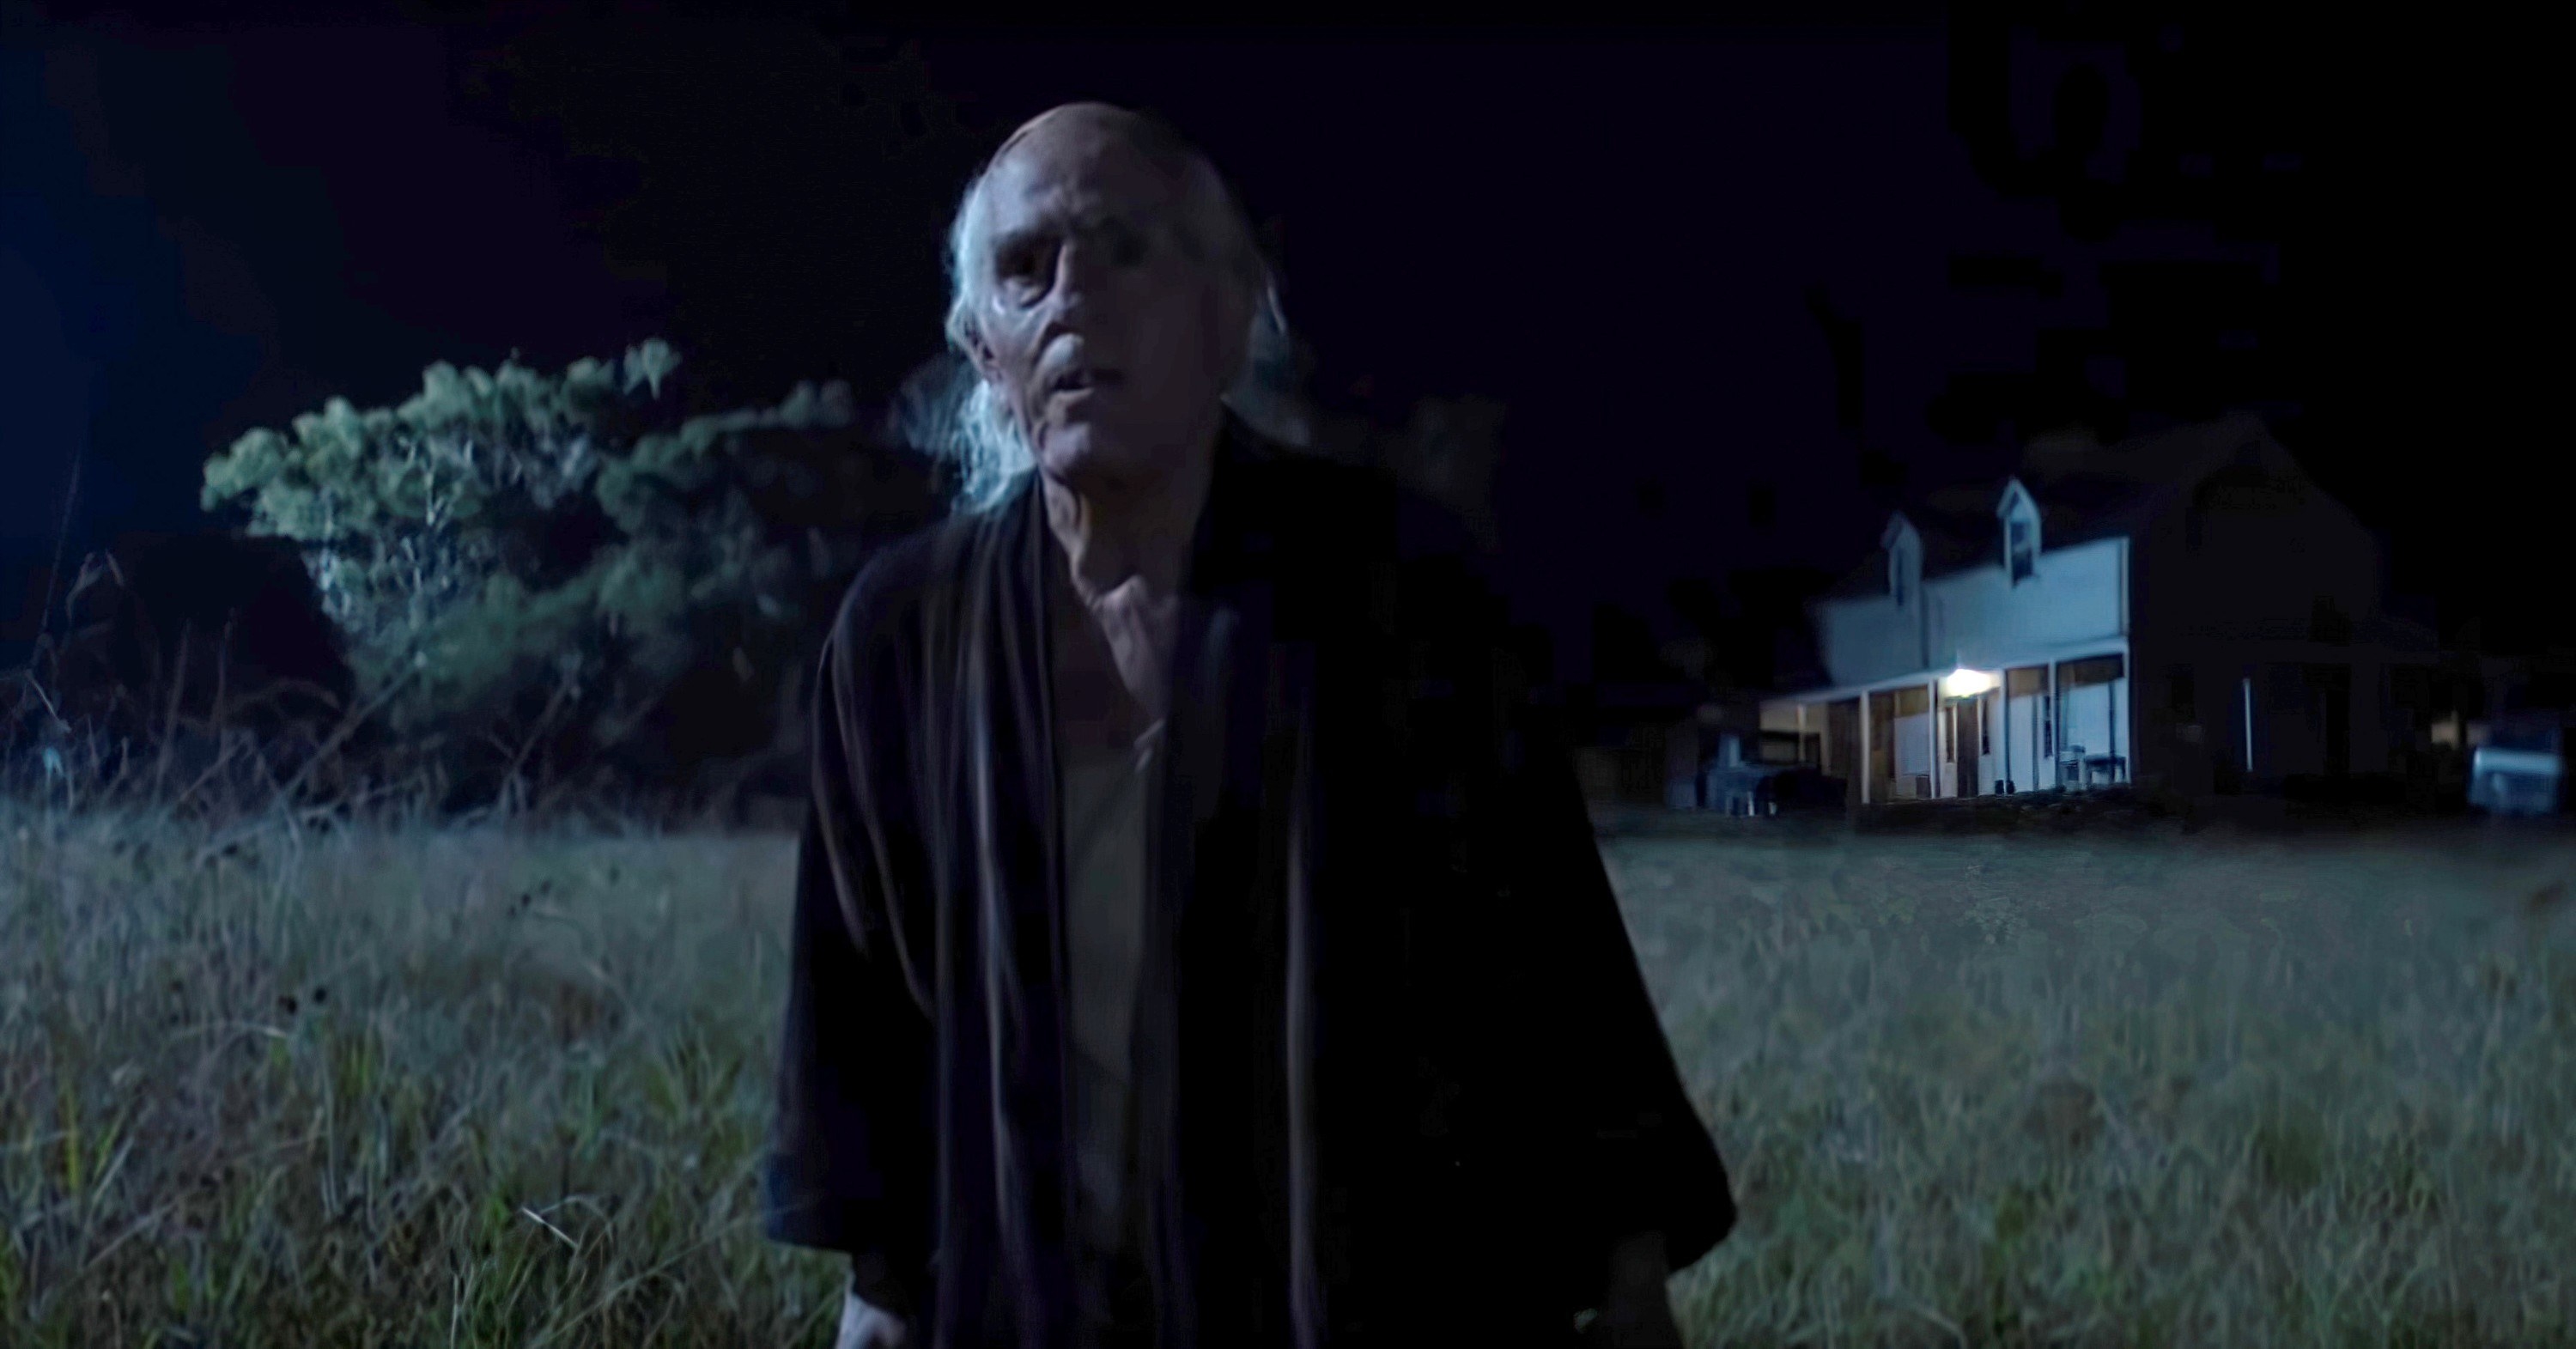 An old man in a robe standing in the field